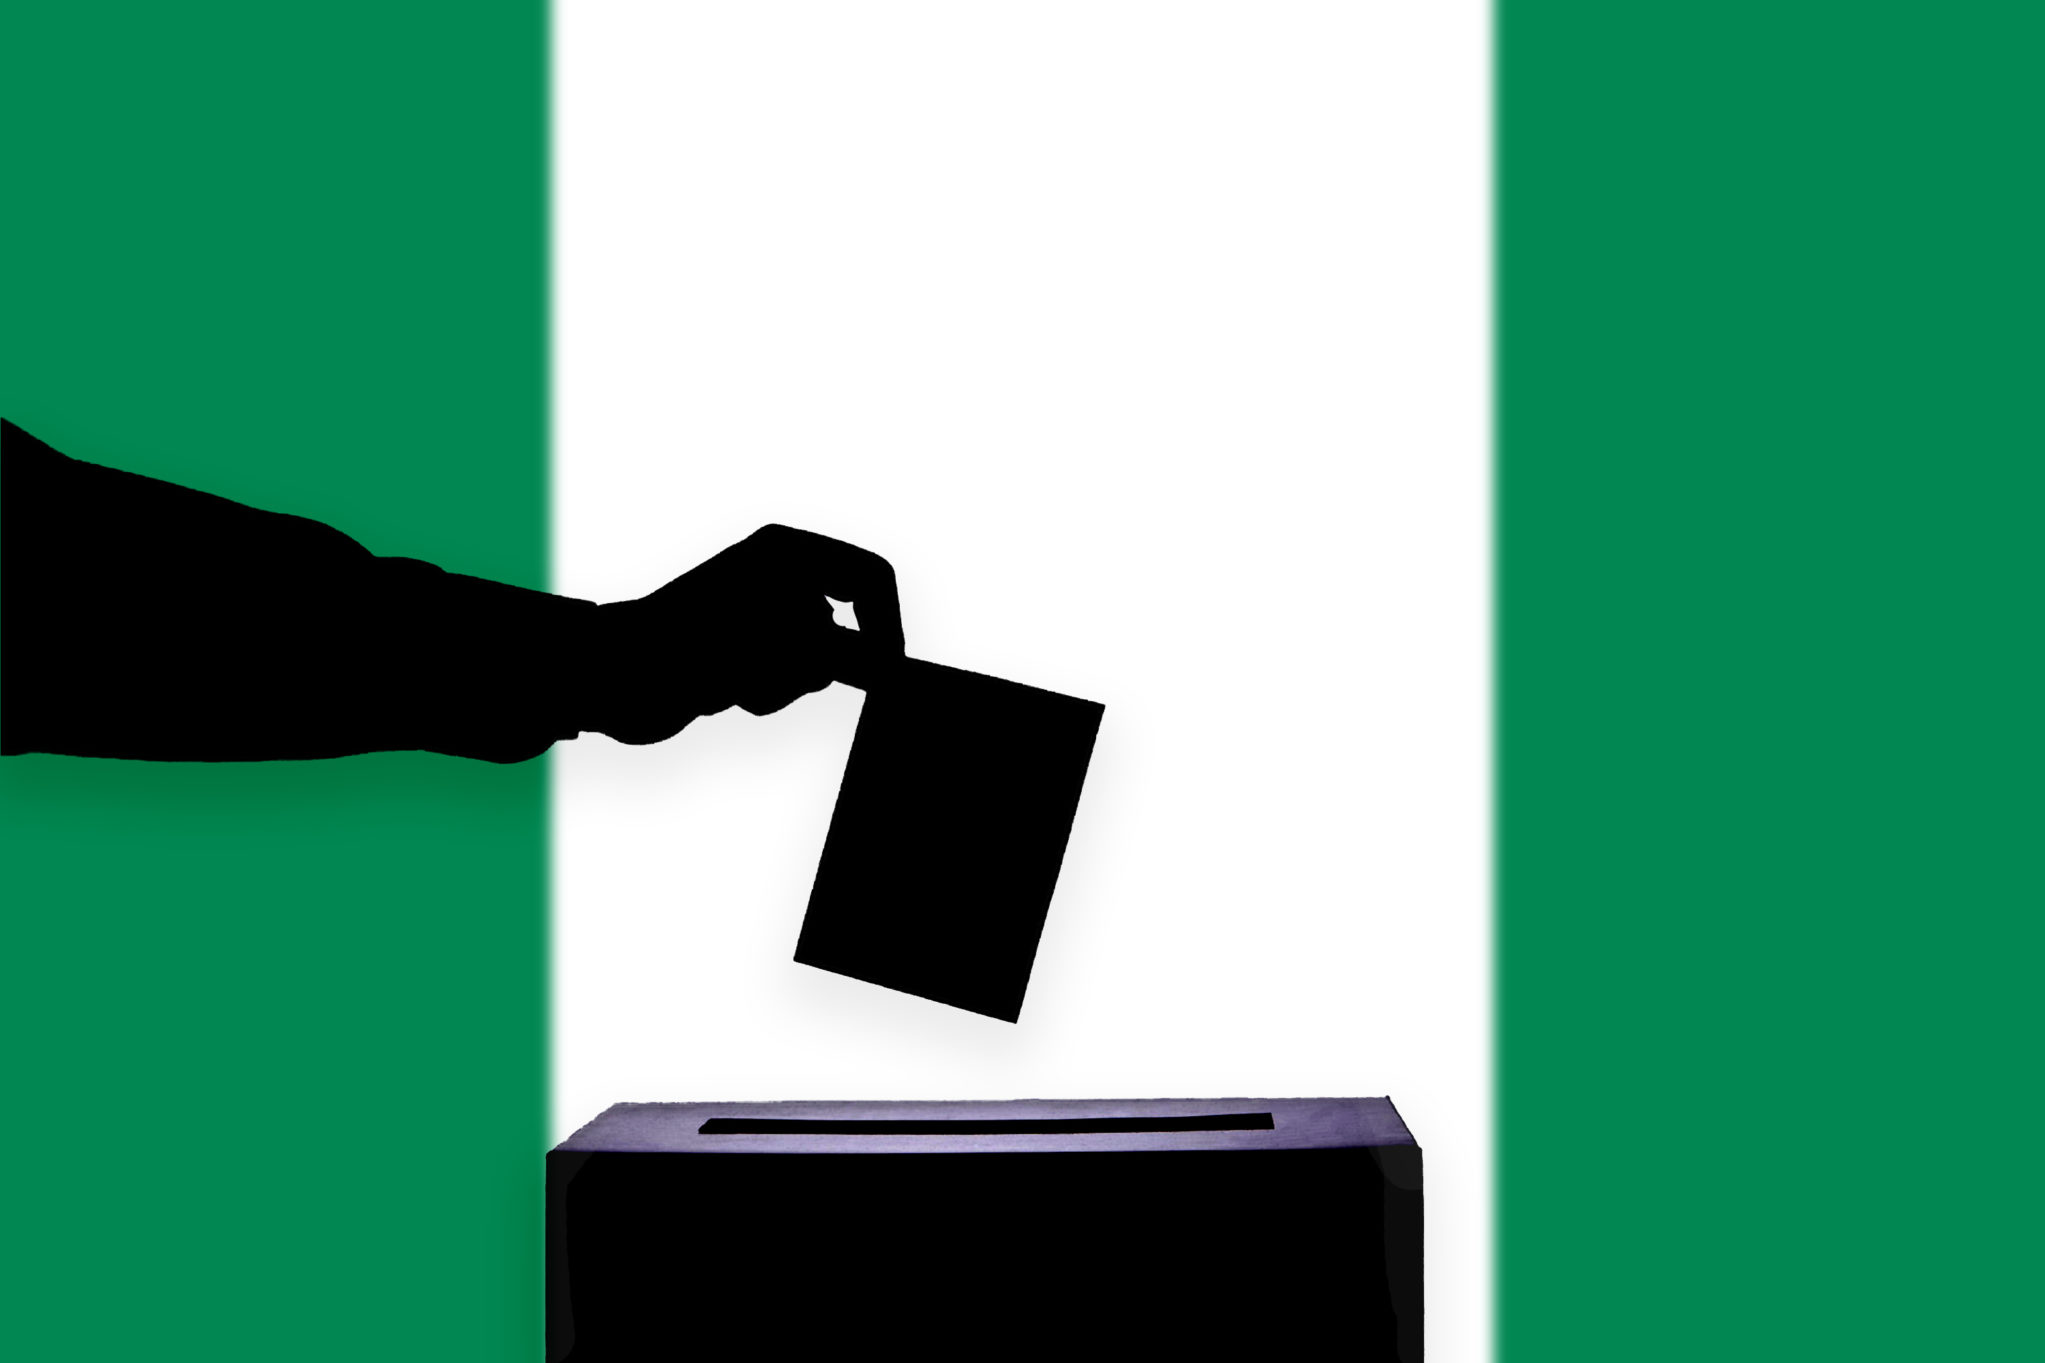 Nigeria should amend its constitution to guarantee voting rights